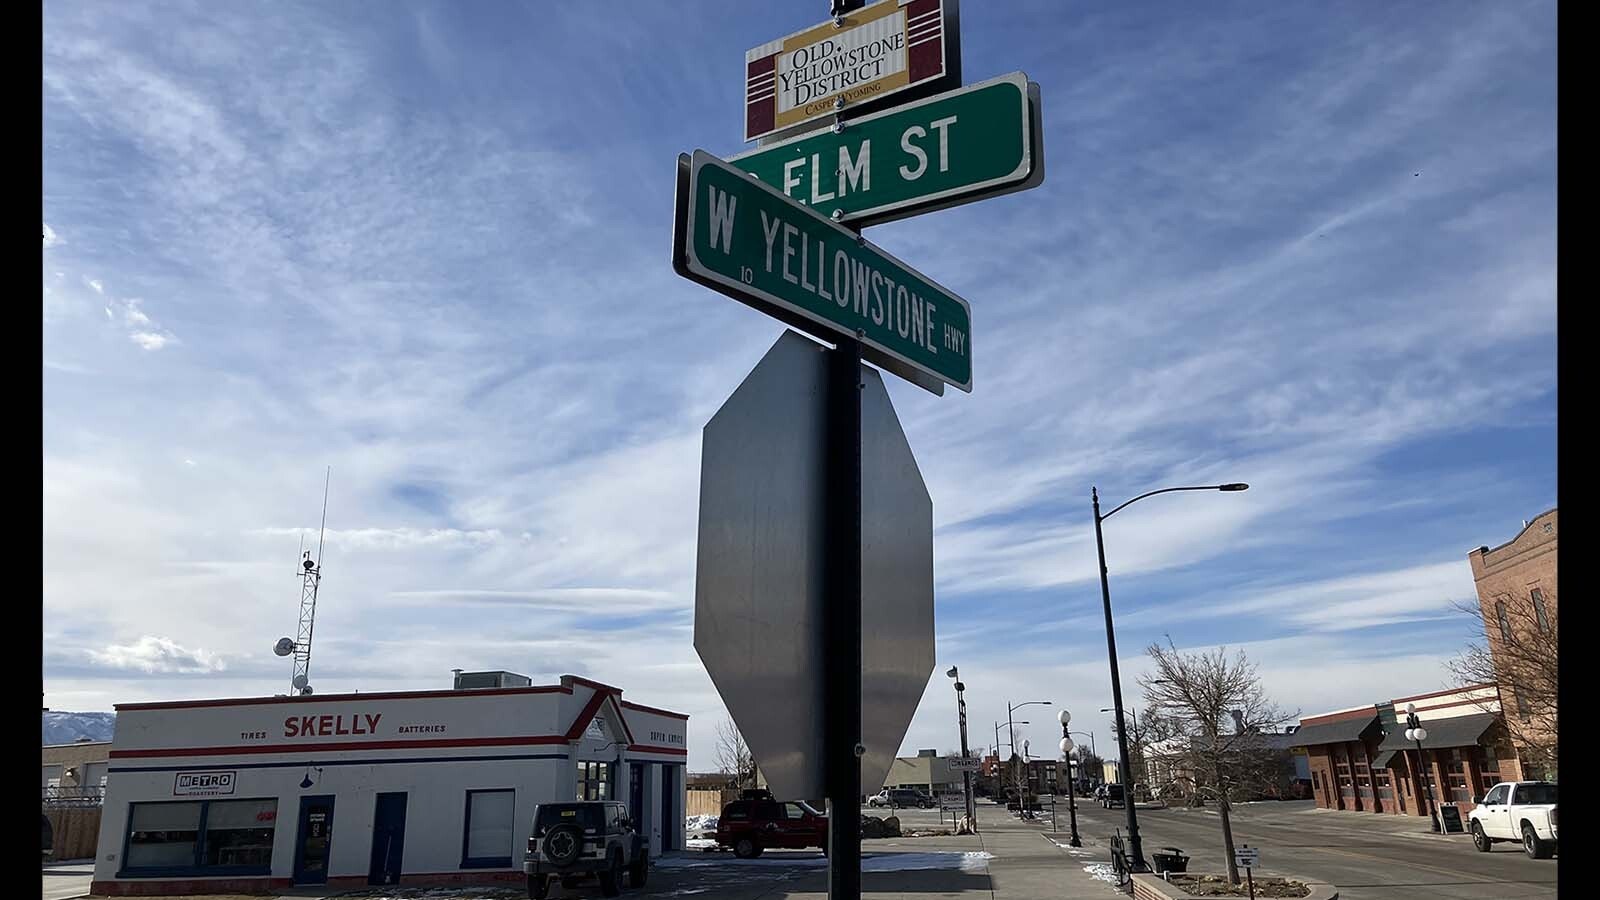 Tentative plans call for the cowboy to remain in Casper, most likely at this intersection of Yellowstone Highway and Elm Street.